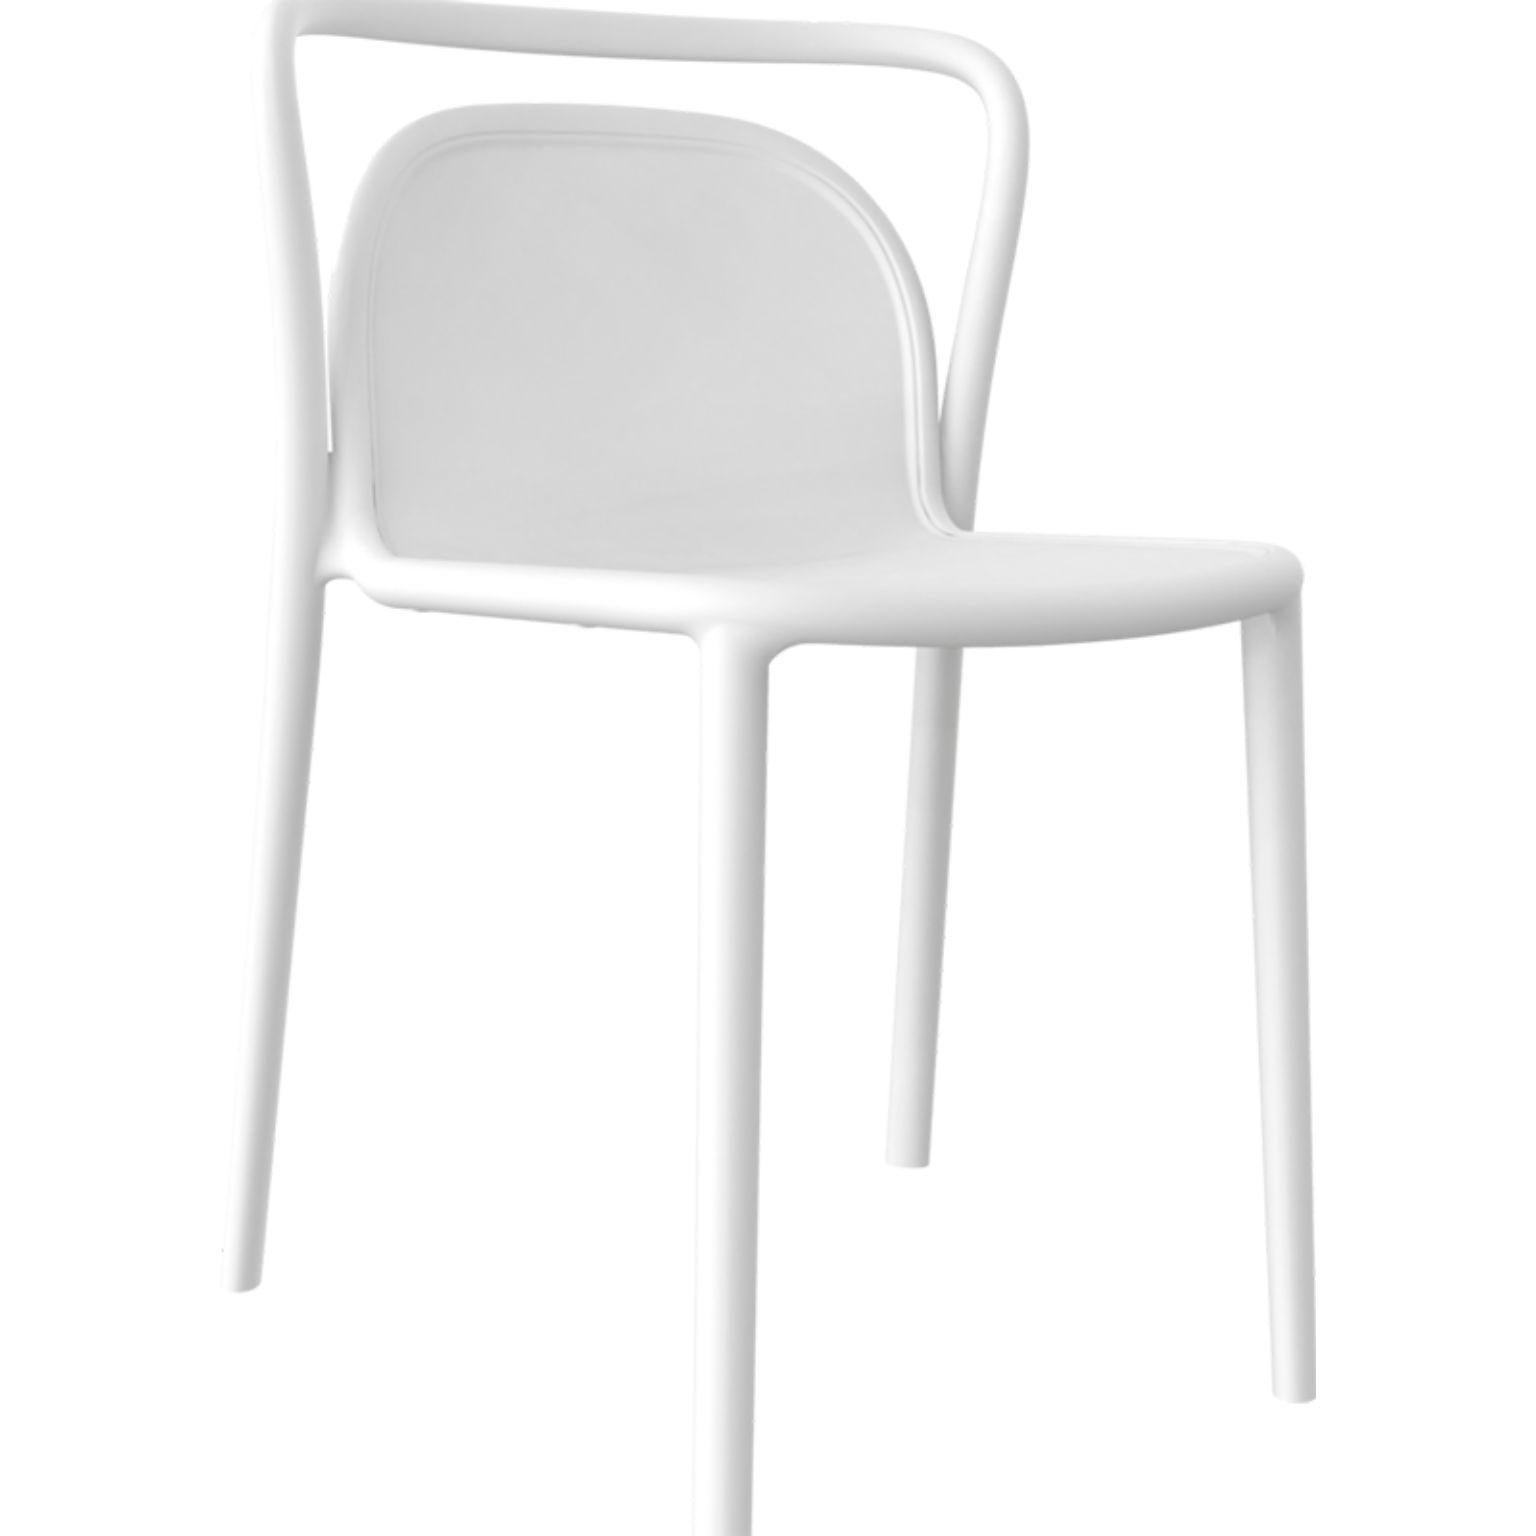 Set of 4 Classe white chairs by MOWEE
Dimensions: D52 x W52 x H77 cm (Seat Height 45 cm)
Material: Polypropylene resin with fiberglass.
Weight: 4.6 kg
Also available in different colors. An optional cushion can be added. 

Classe is a chair